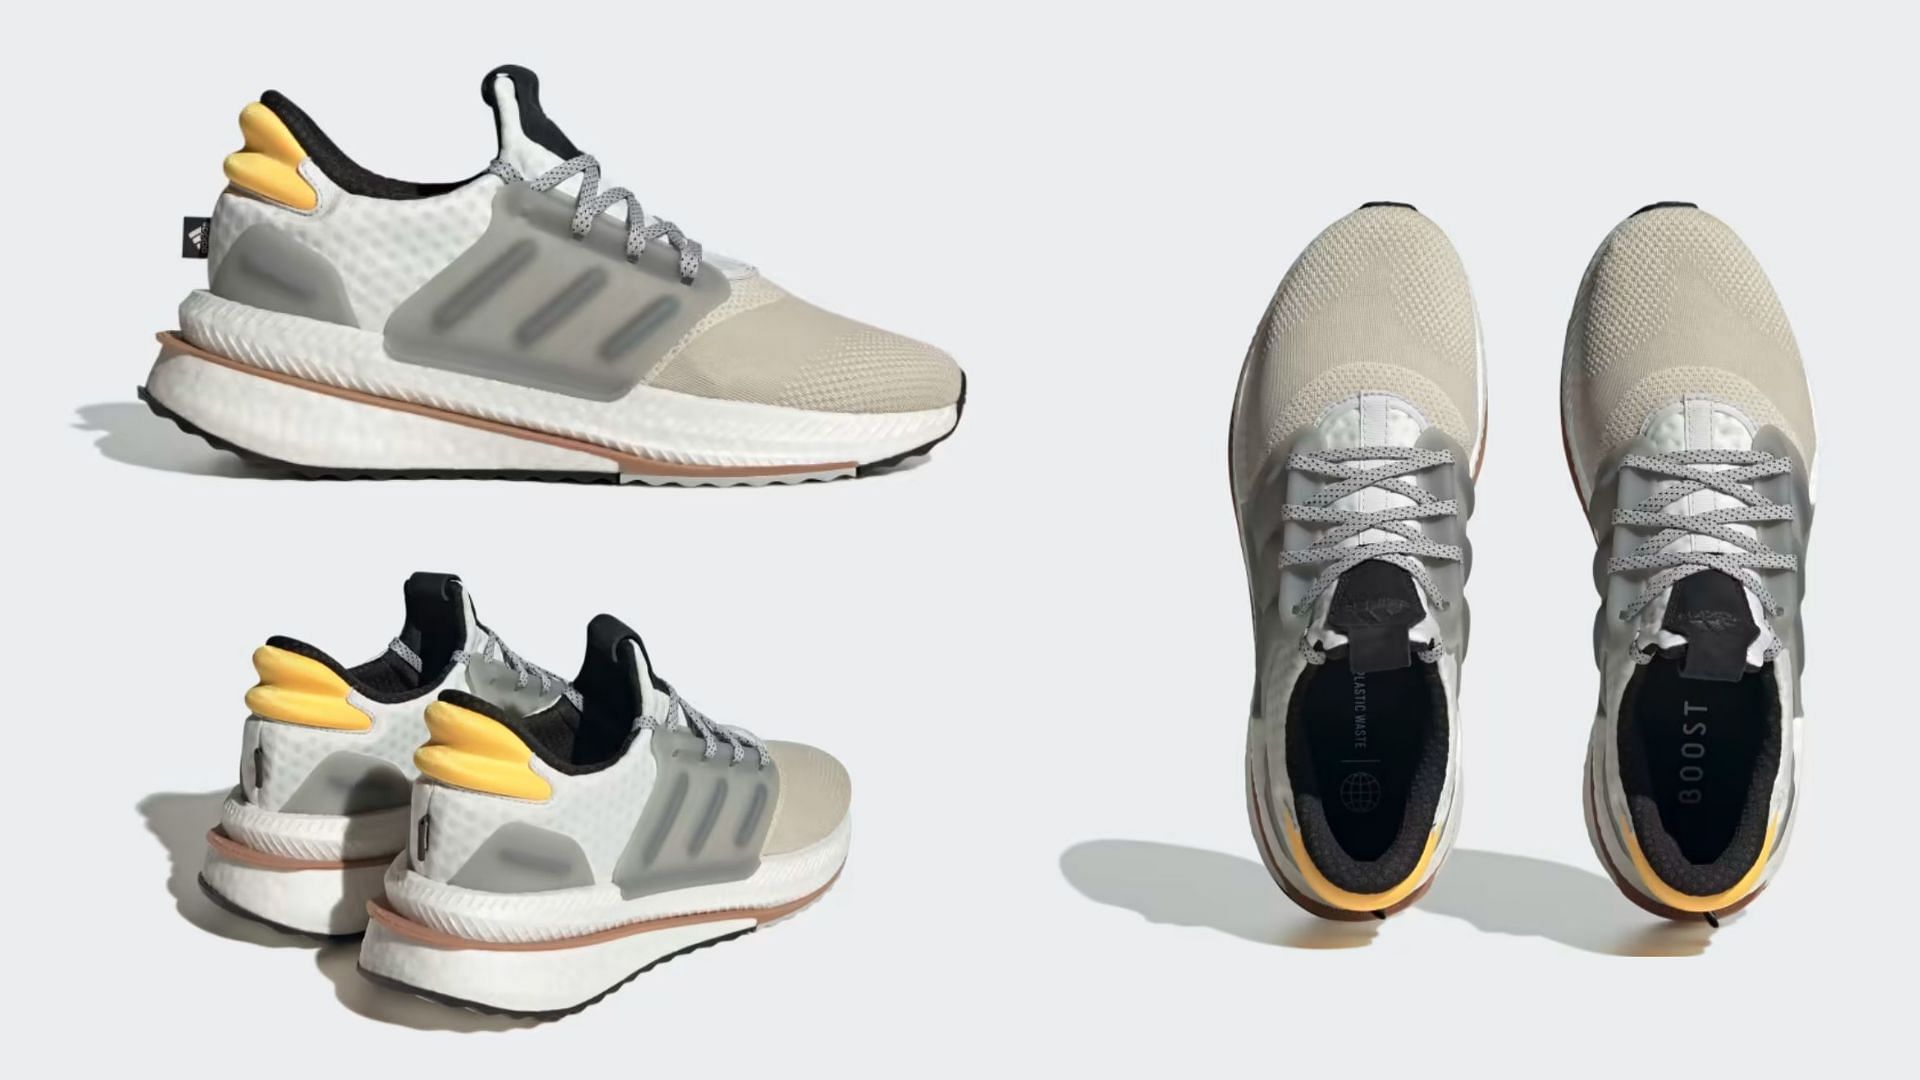 Take a closer look at the sneakers (Image via Adidas)